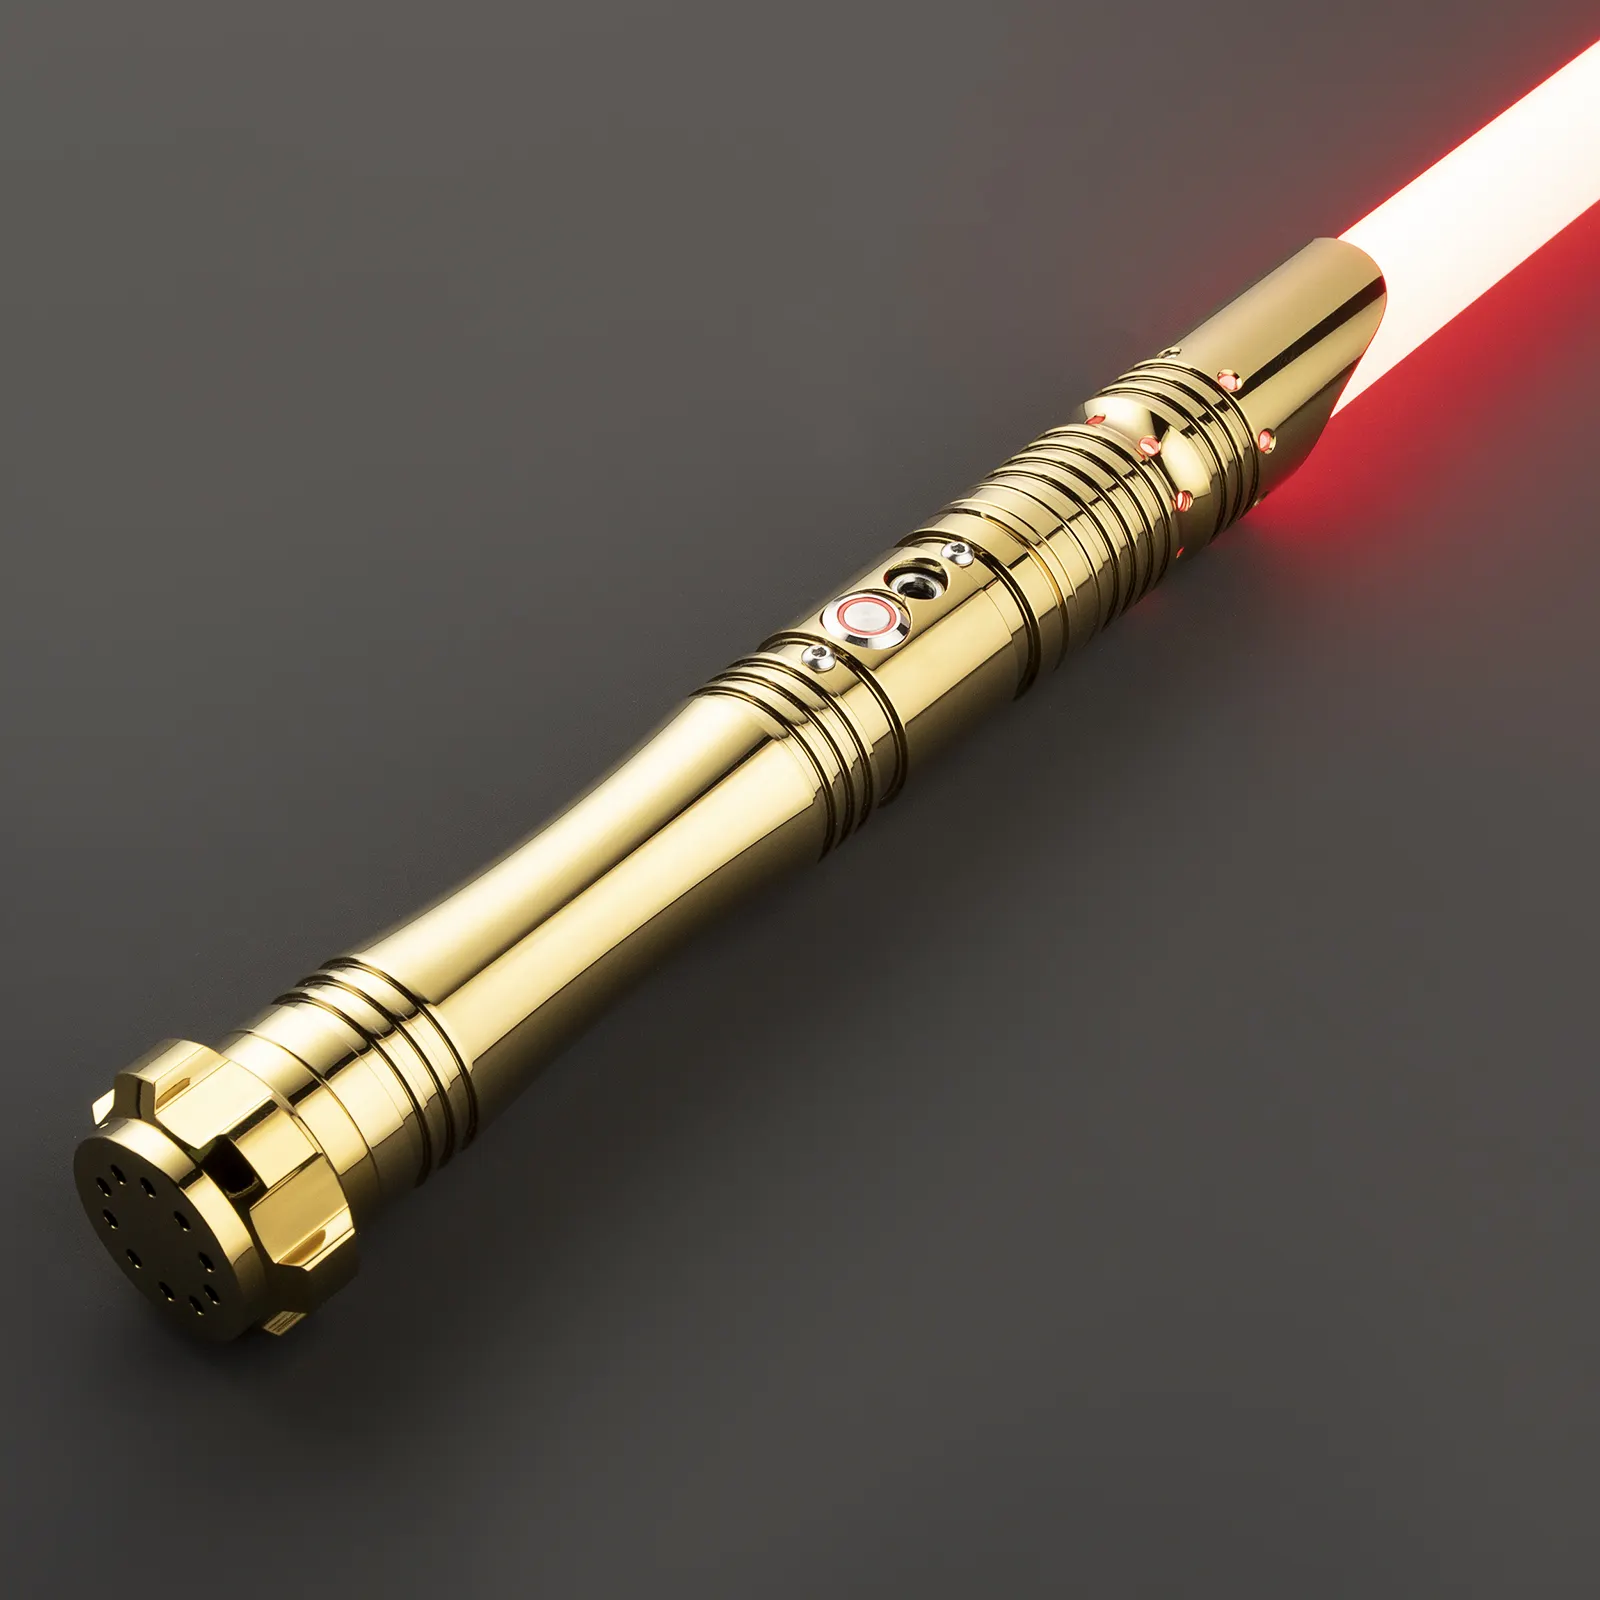 LGT SABERSTUDIO xenopixel metal hilt heavy dueling lightsaber smooth swing color changing FOC has 34 sets sound effects